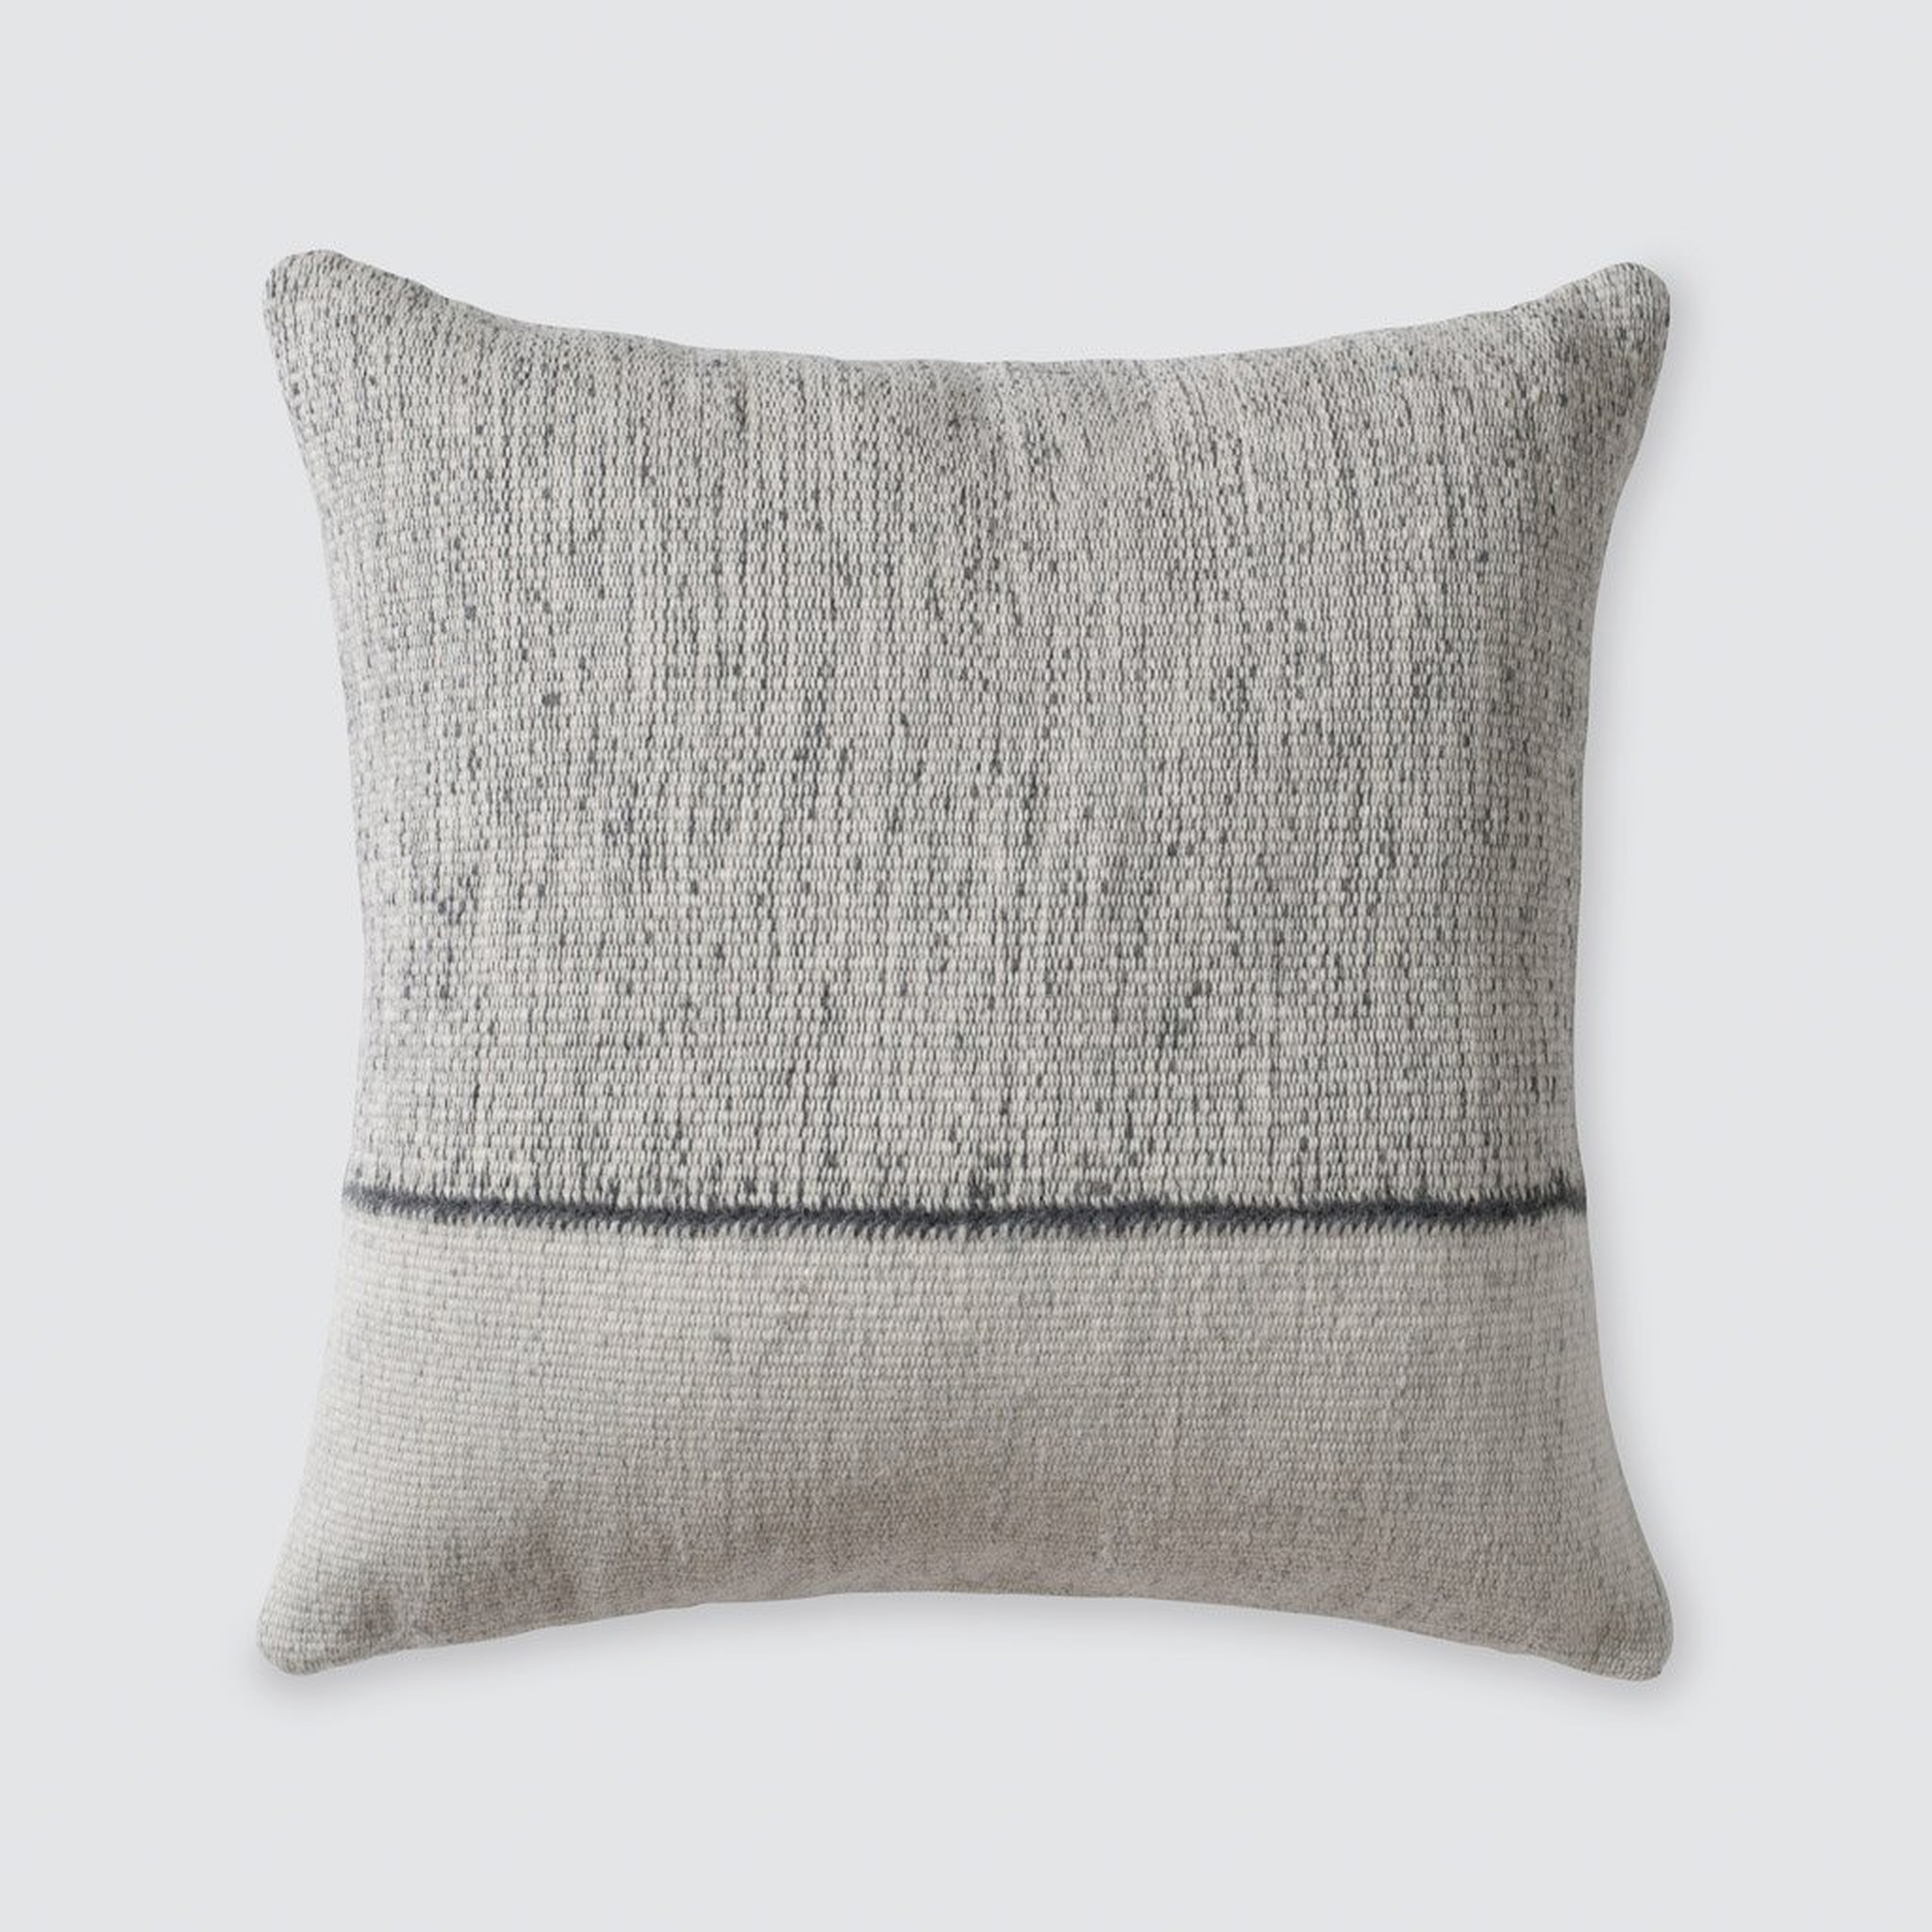 Claro Pillow - Grey - 20 in. x 20 in. By The Citizenry - The Citizenry